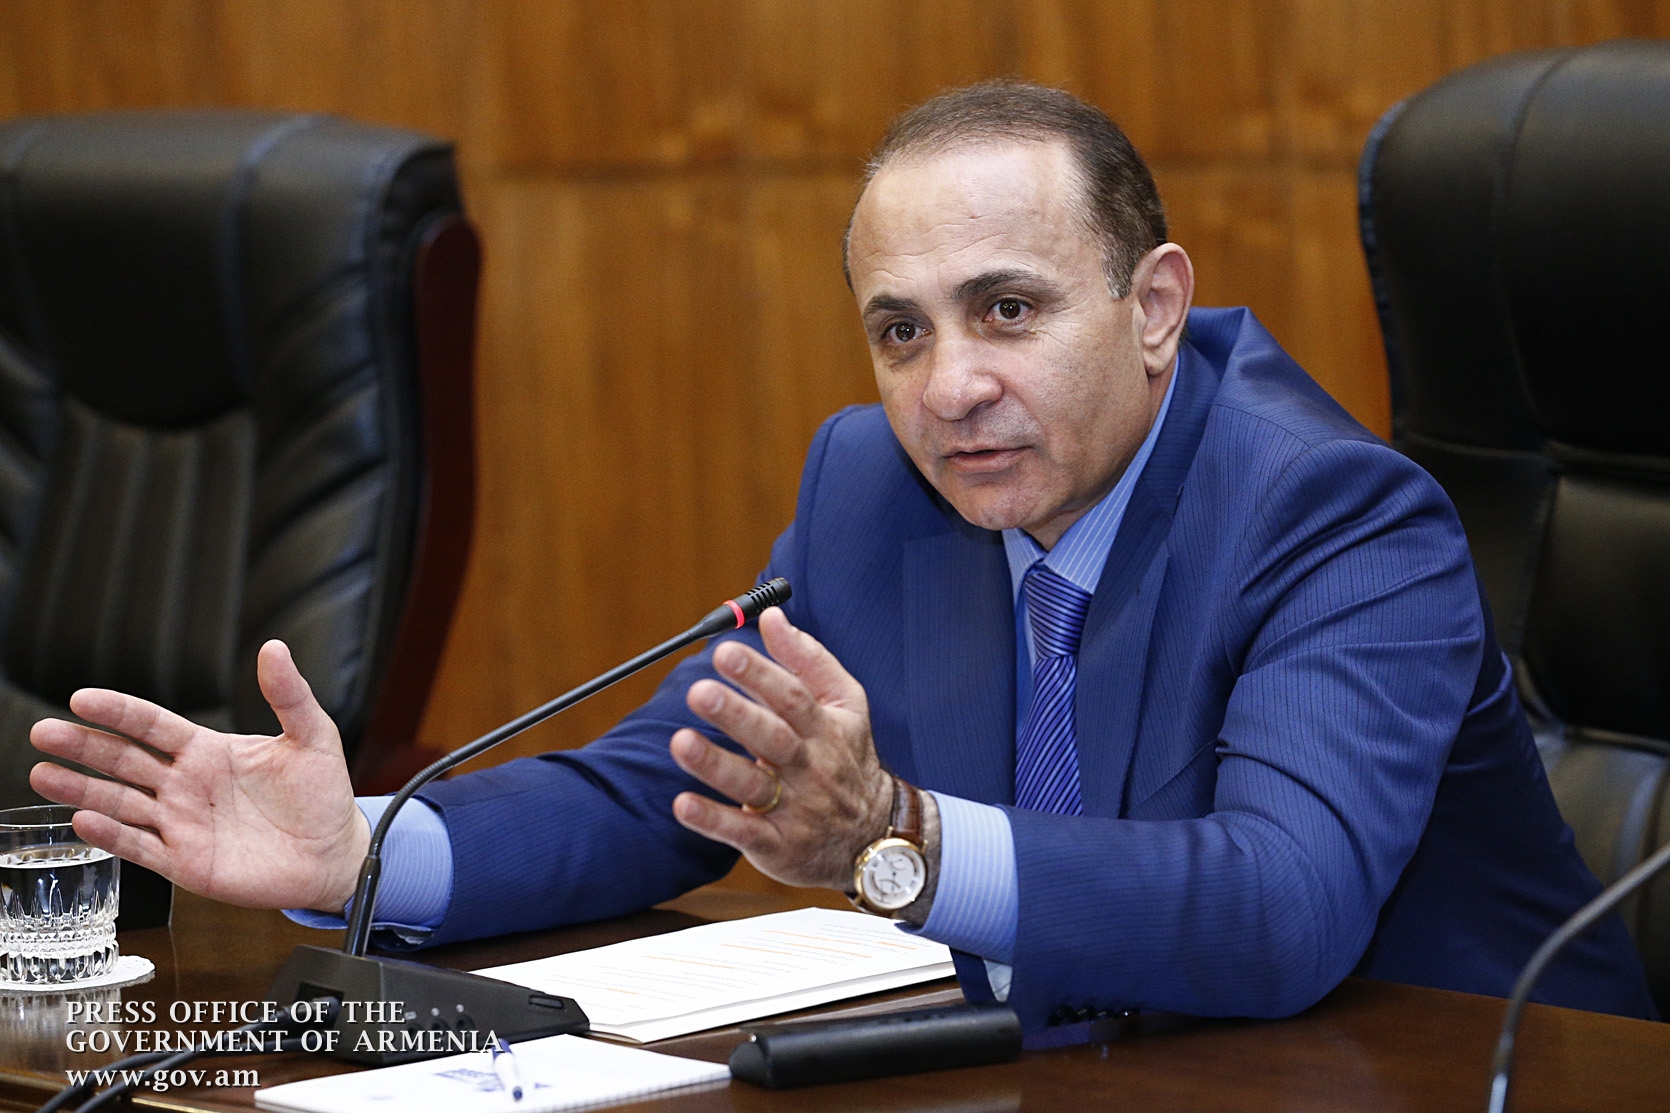 Each investor should understand that he is in safe hands: Armenia’s PM